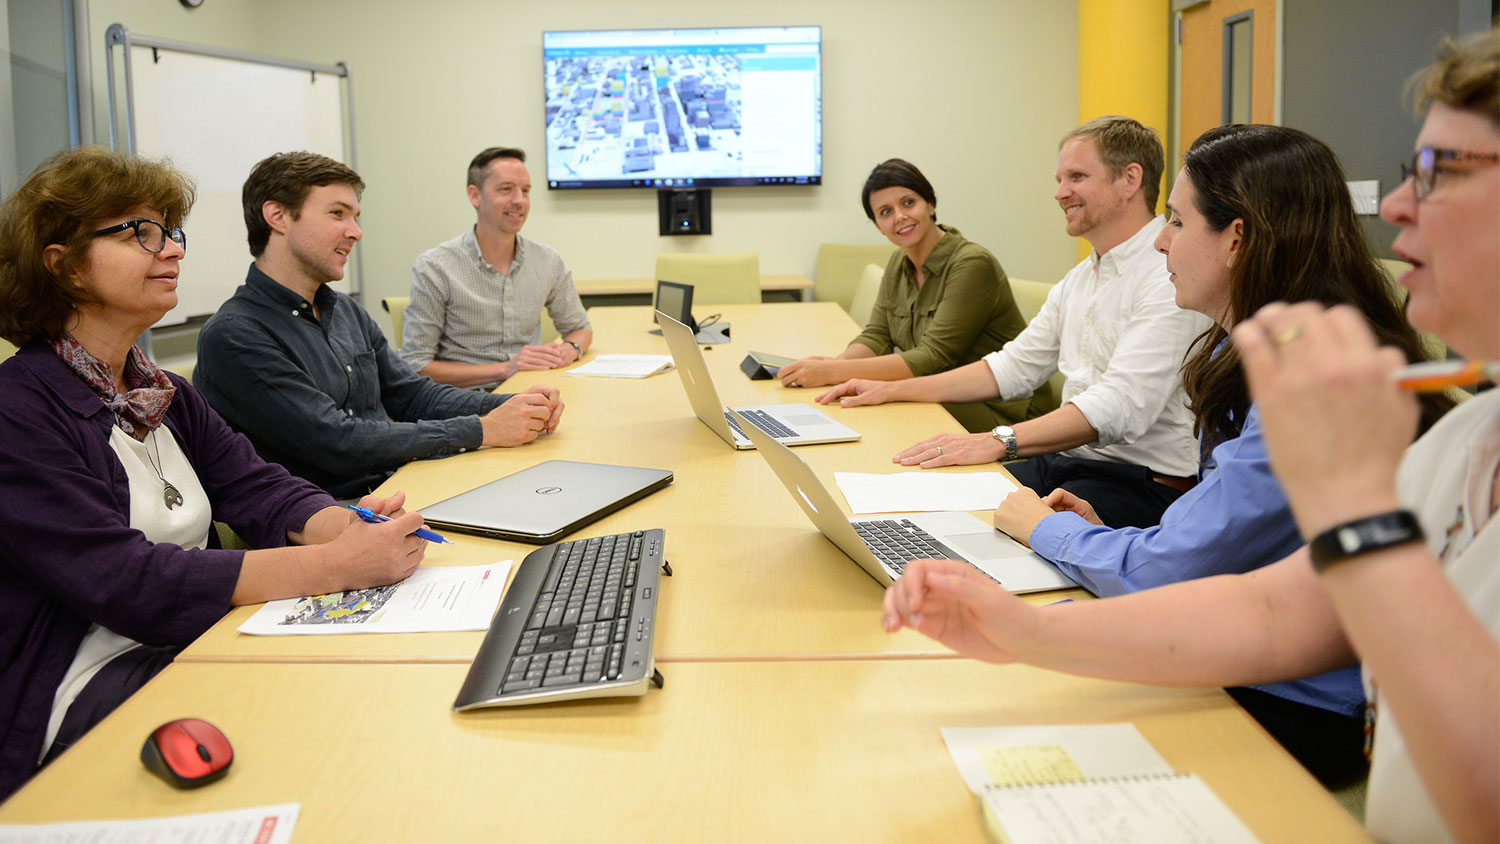 A photo of a meeting at the North Carolina State University Center for Geospatial Analytics